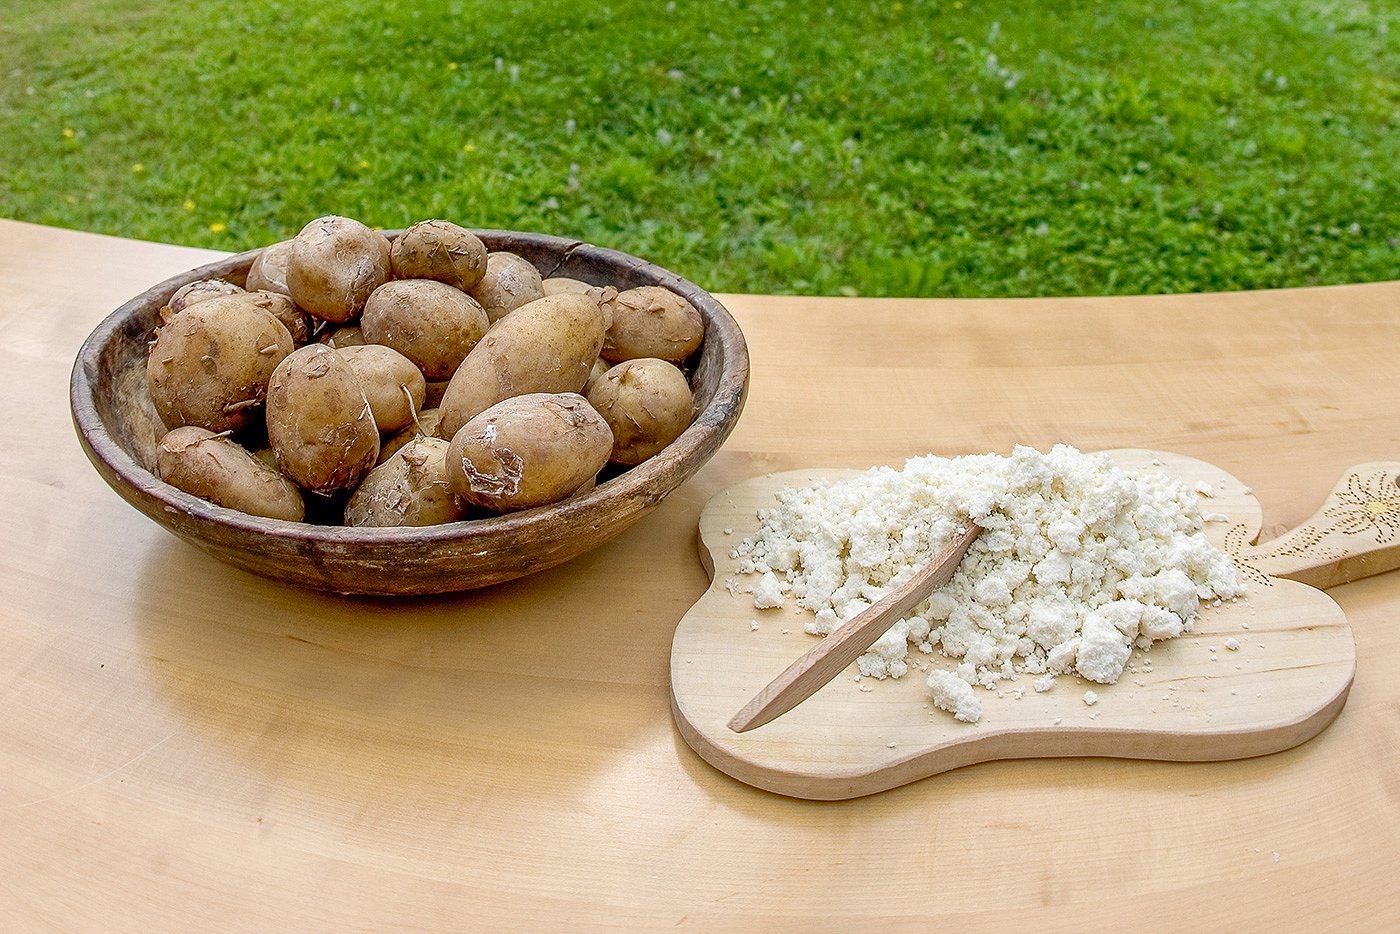 čompe (boiled unpeeled potatoes) and savoury sheep's cottage cheese